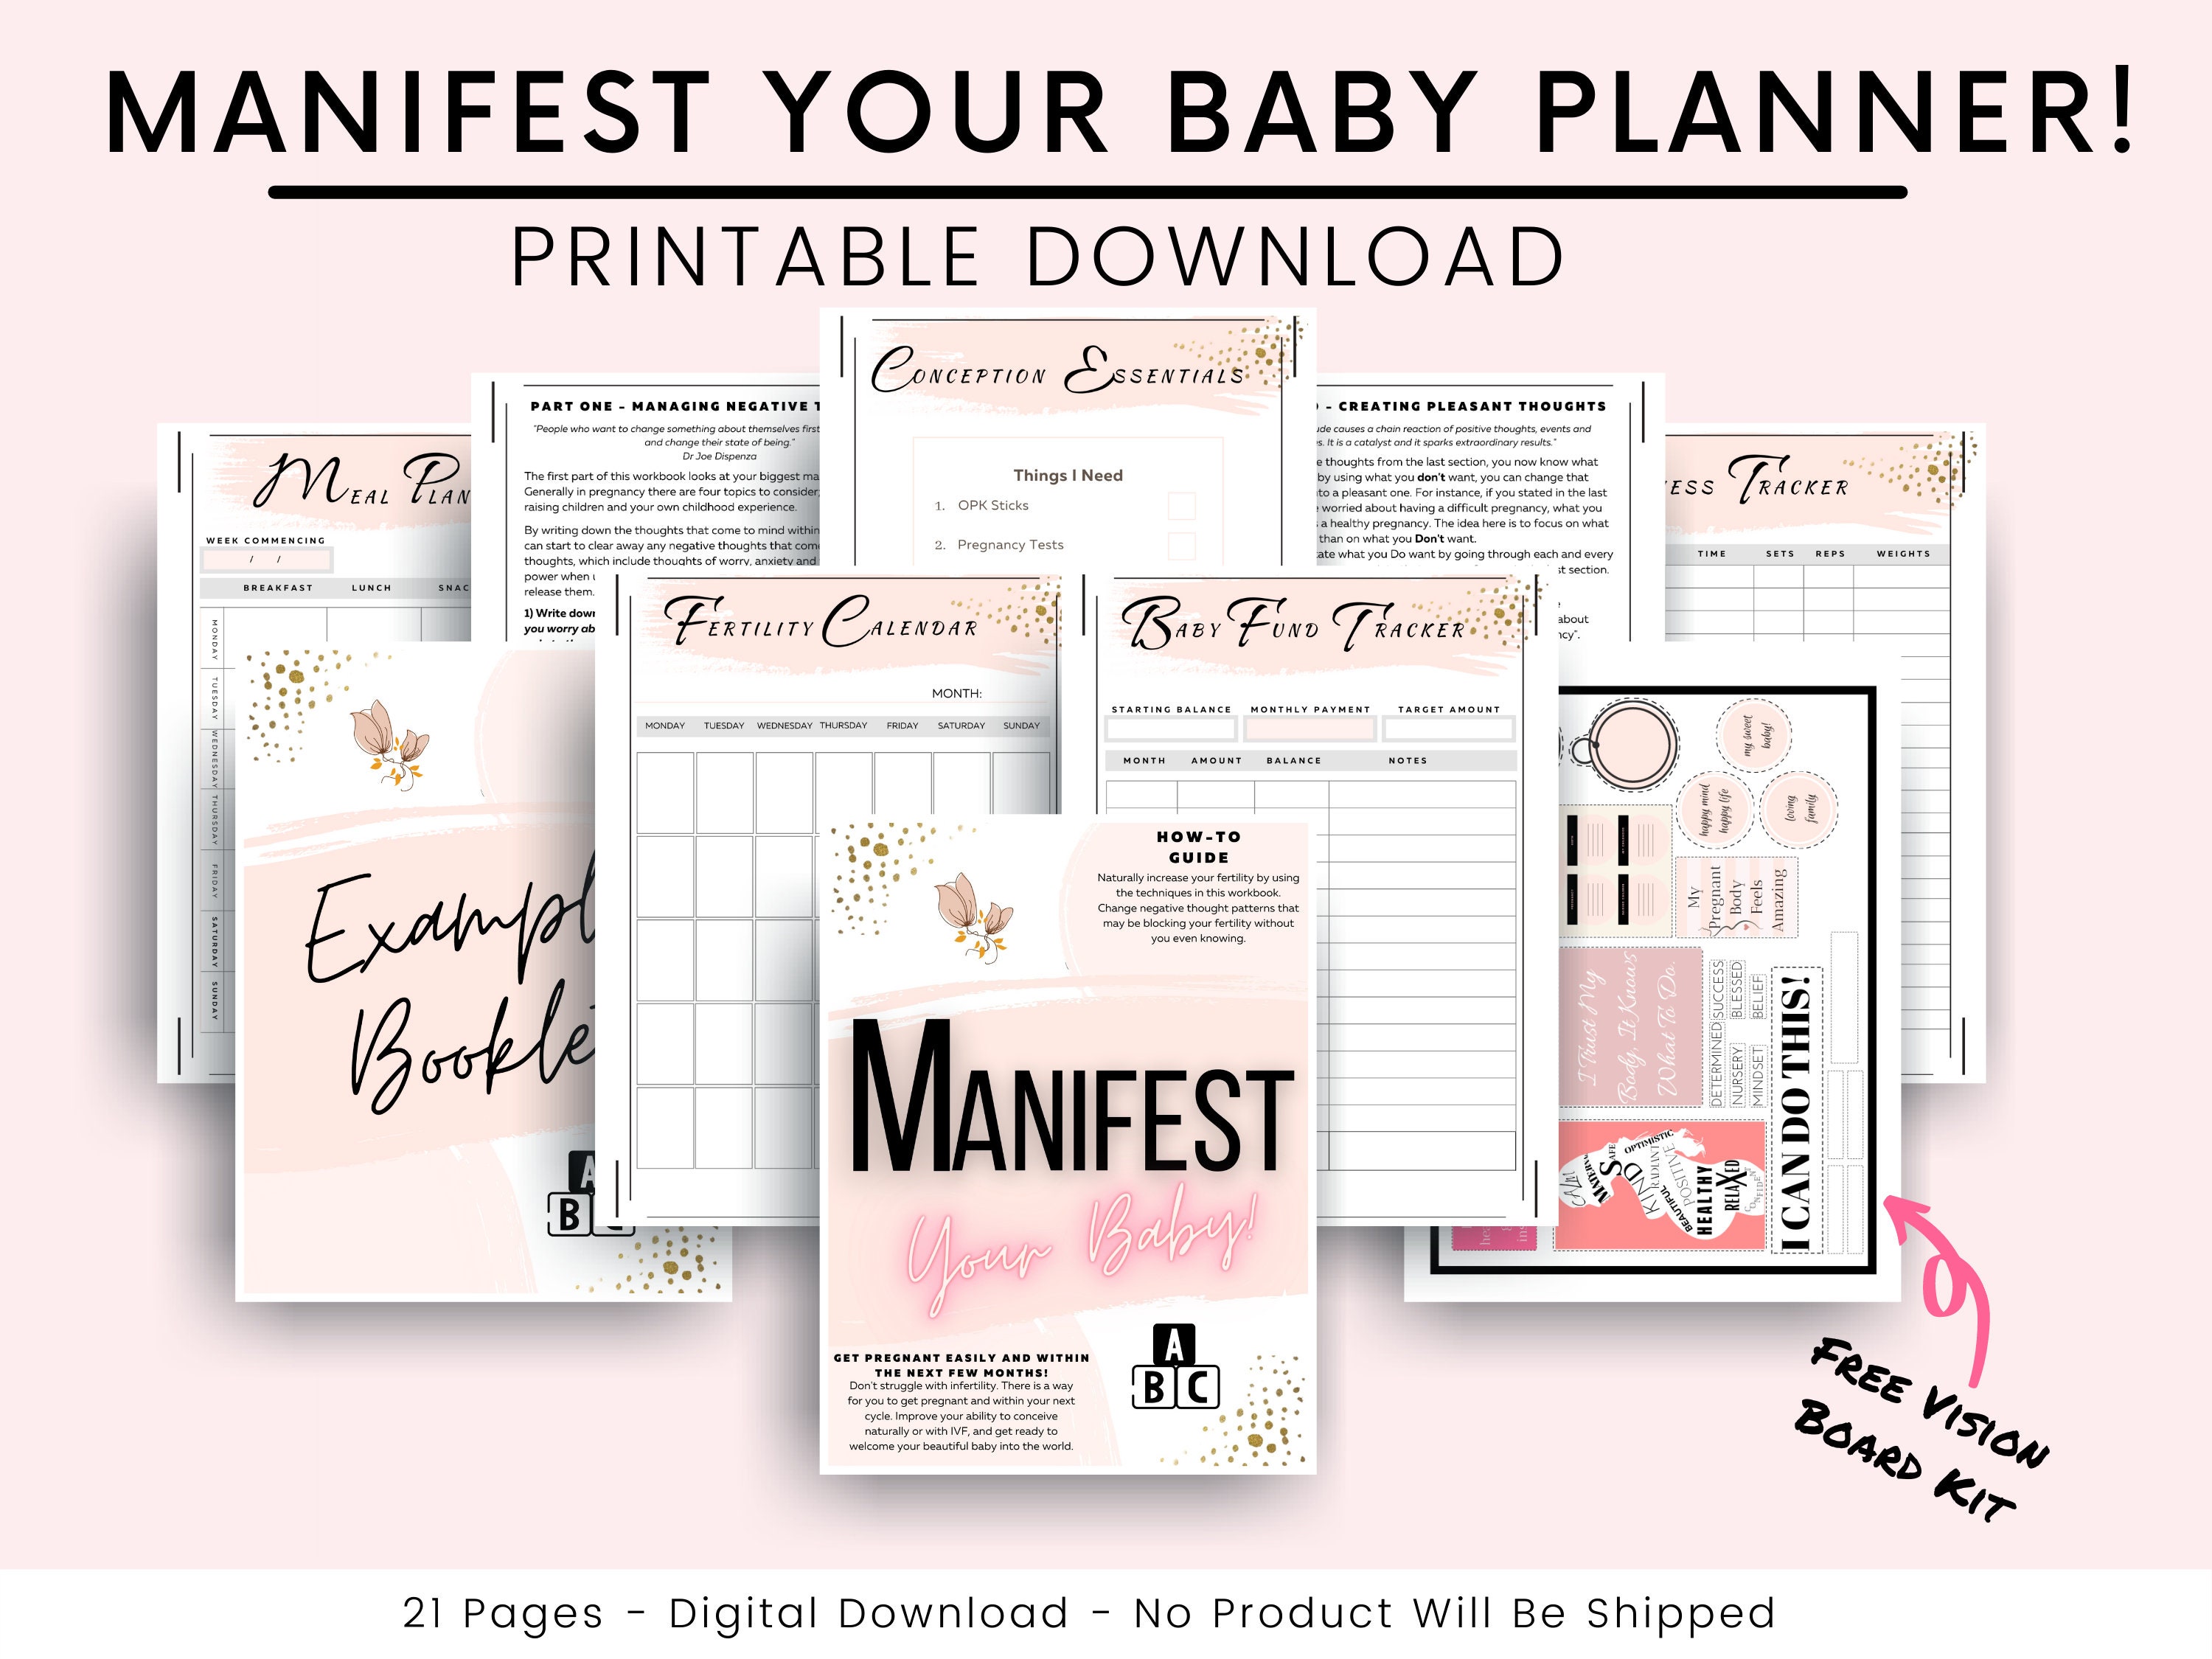 Manifest Your Baby Planner Trying to Conceive Baby Planner - Etsy UK